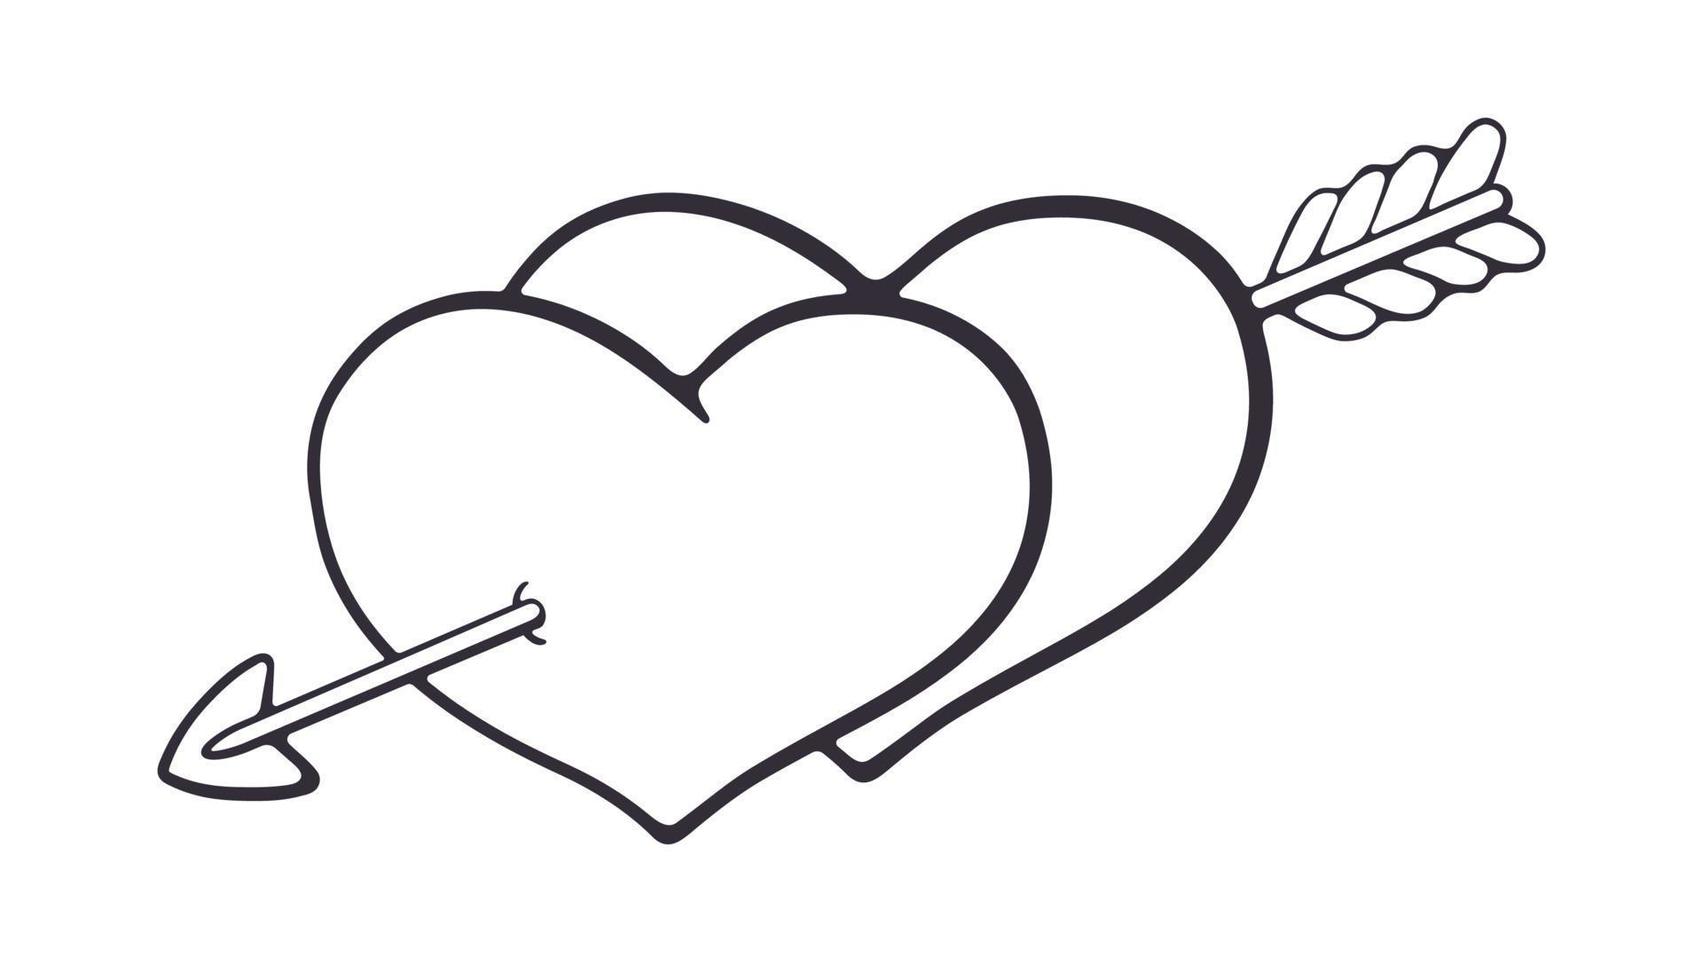 Outline doodle of two hearts pierced arrow vector